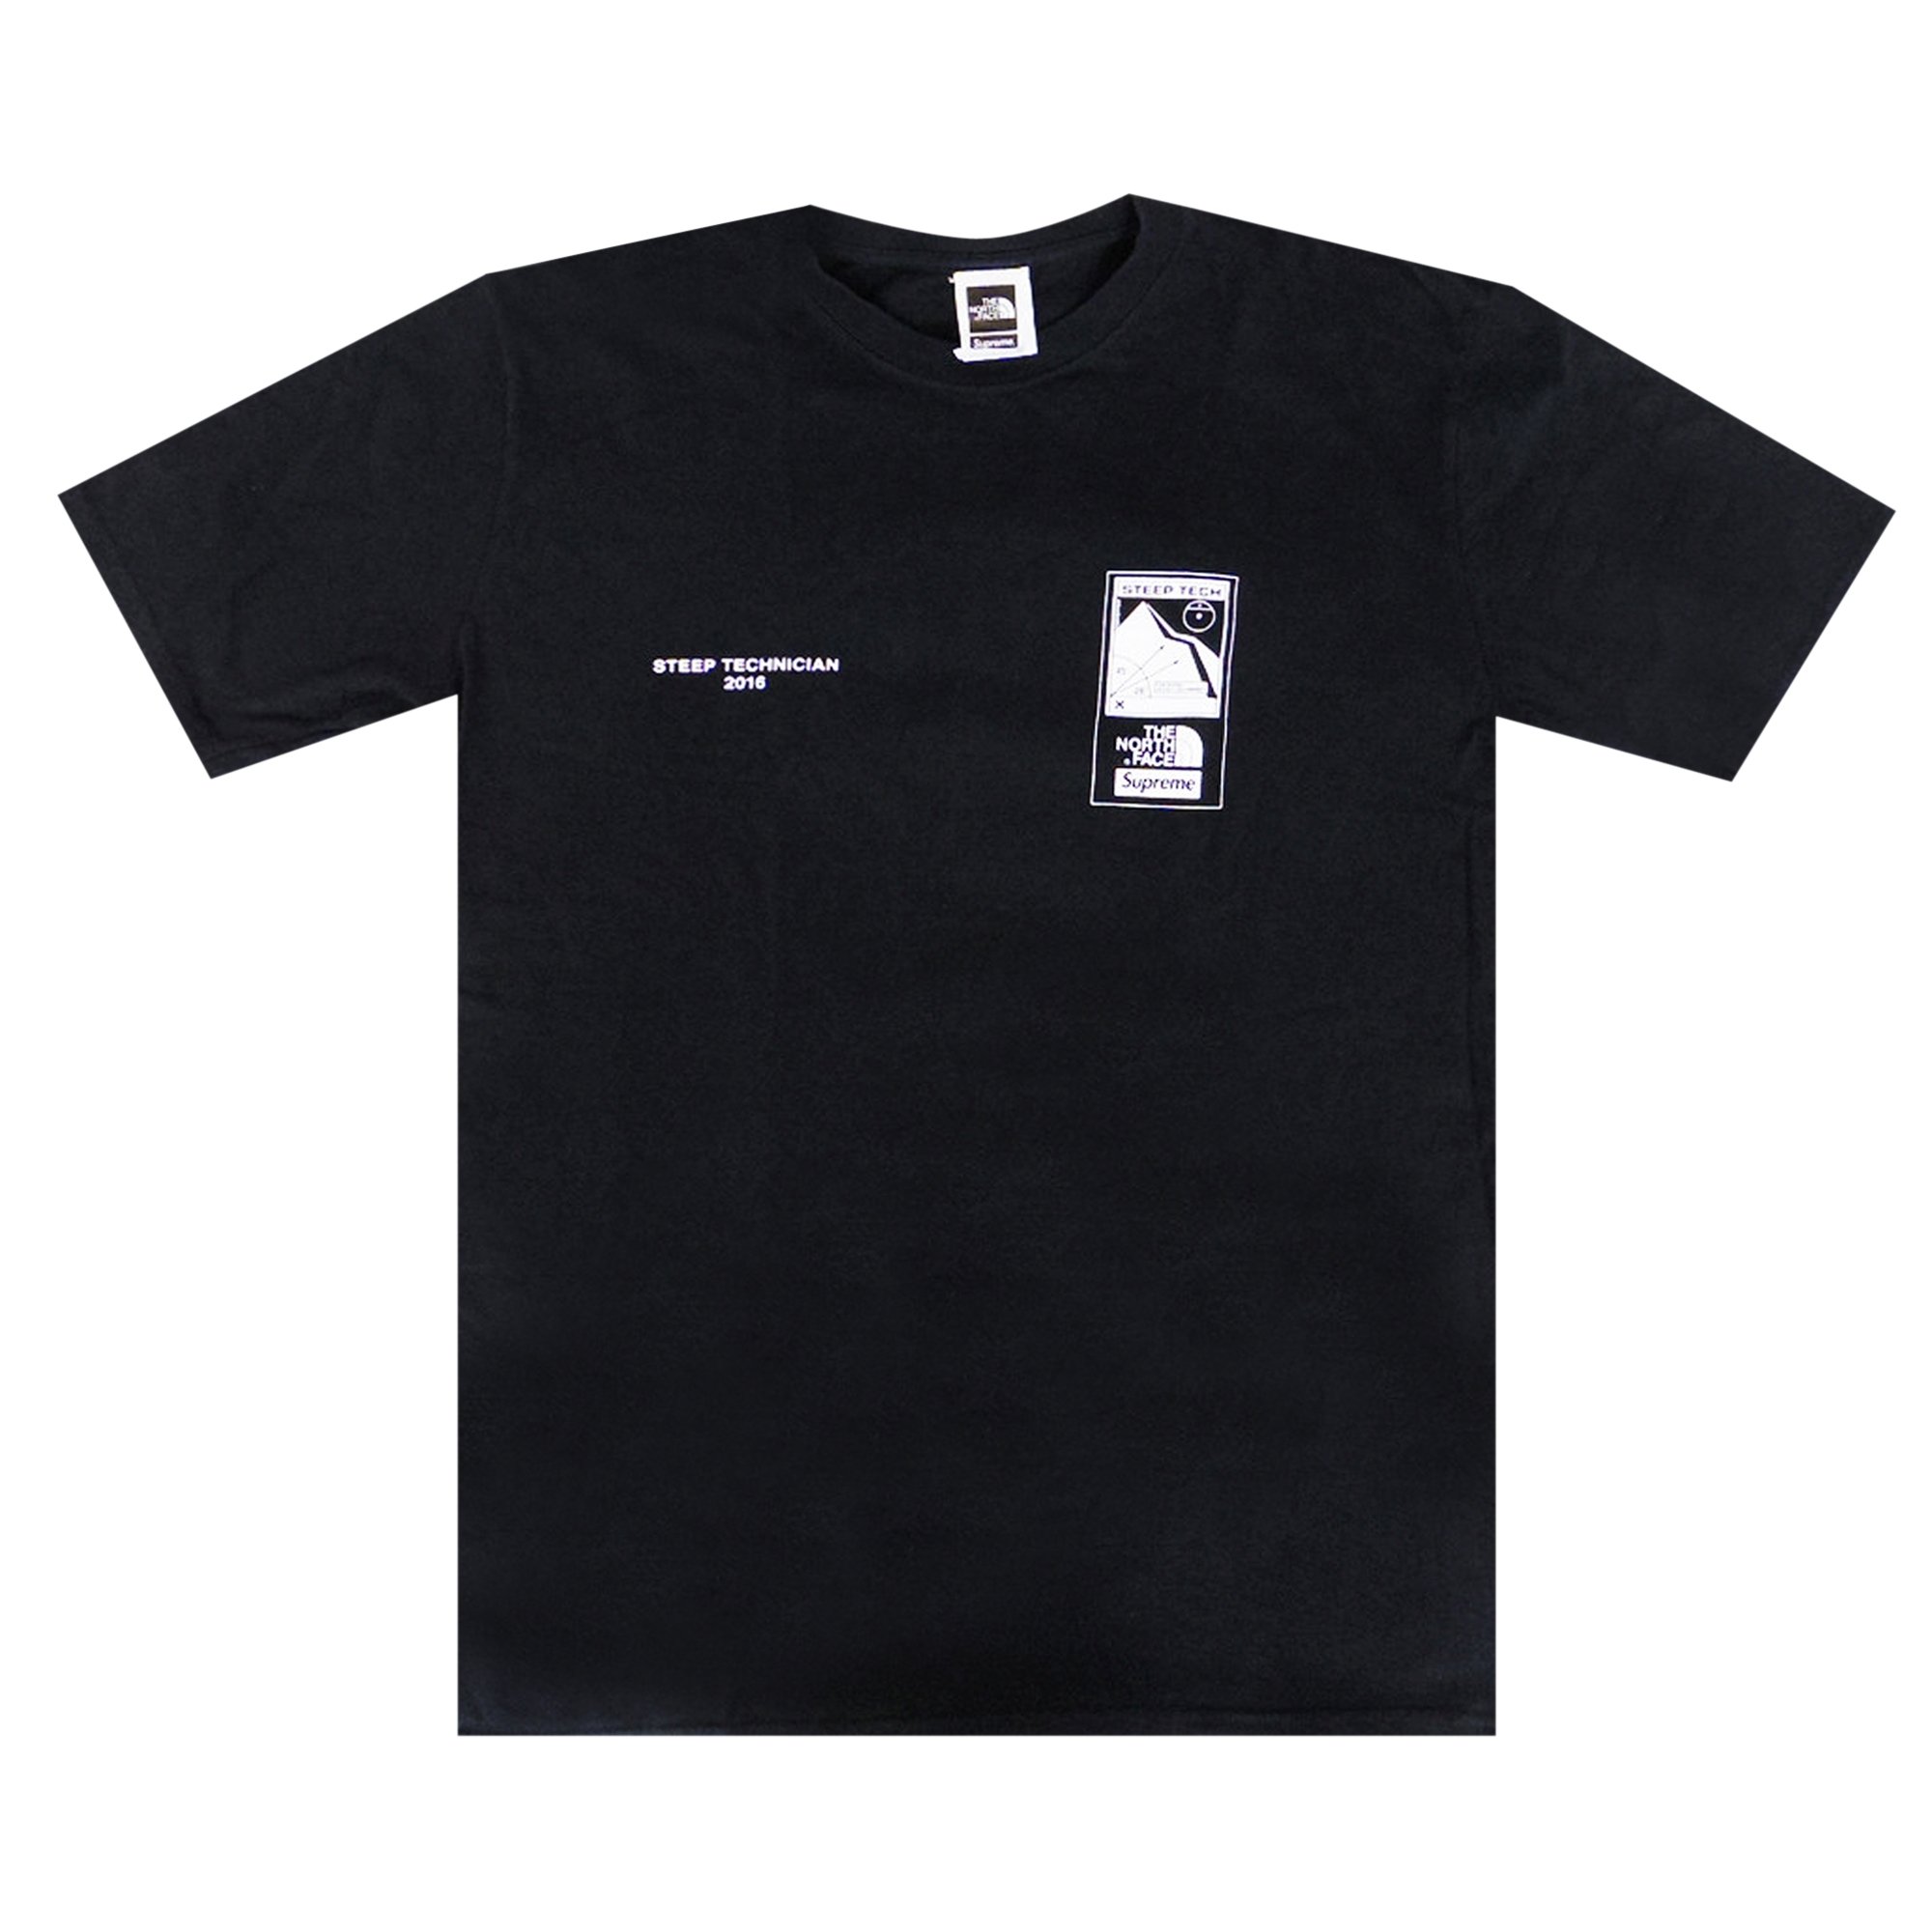 Buy Supreme x The North Face Steep Tech Tee 'Black' - SS16KN4